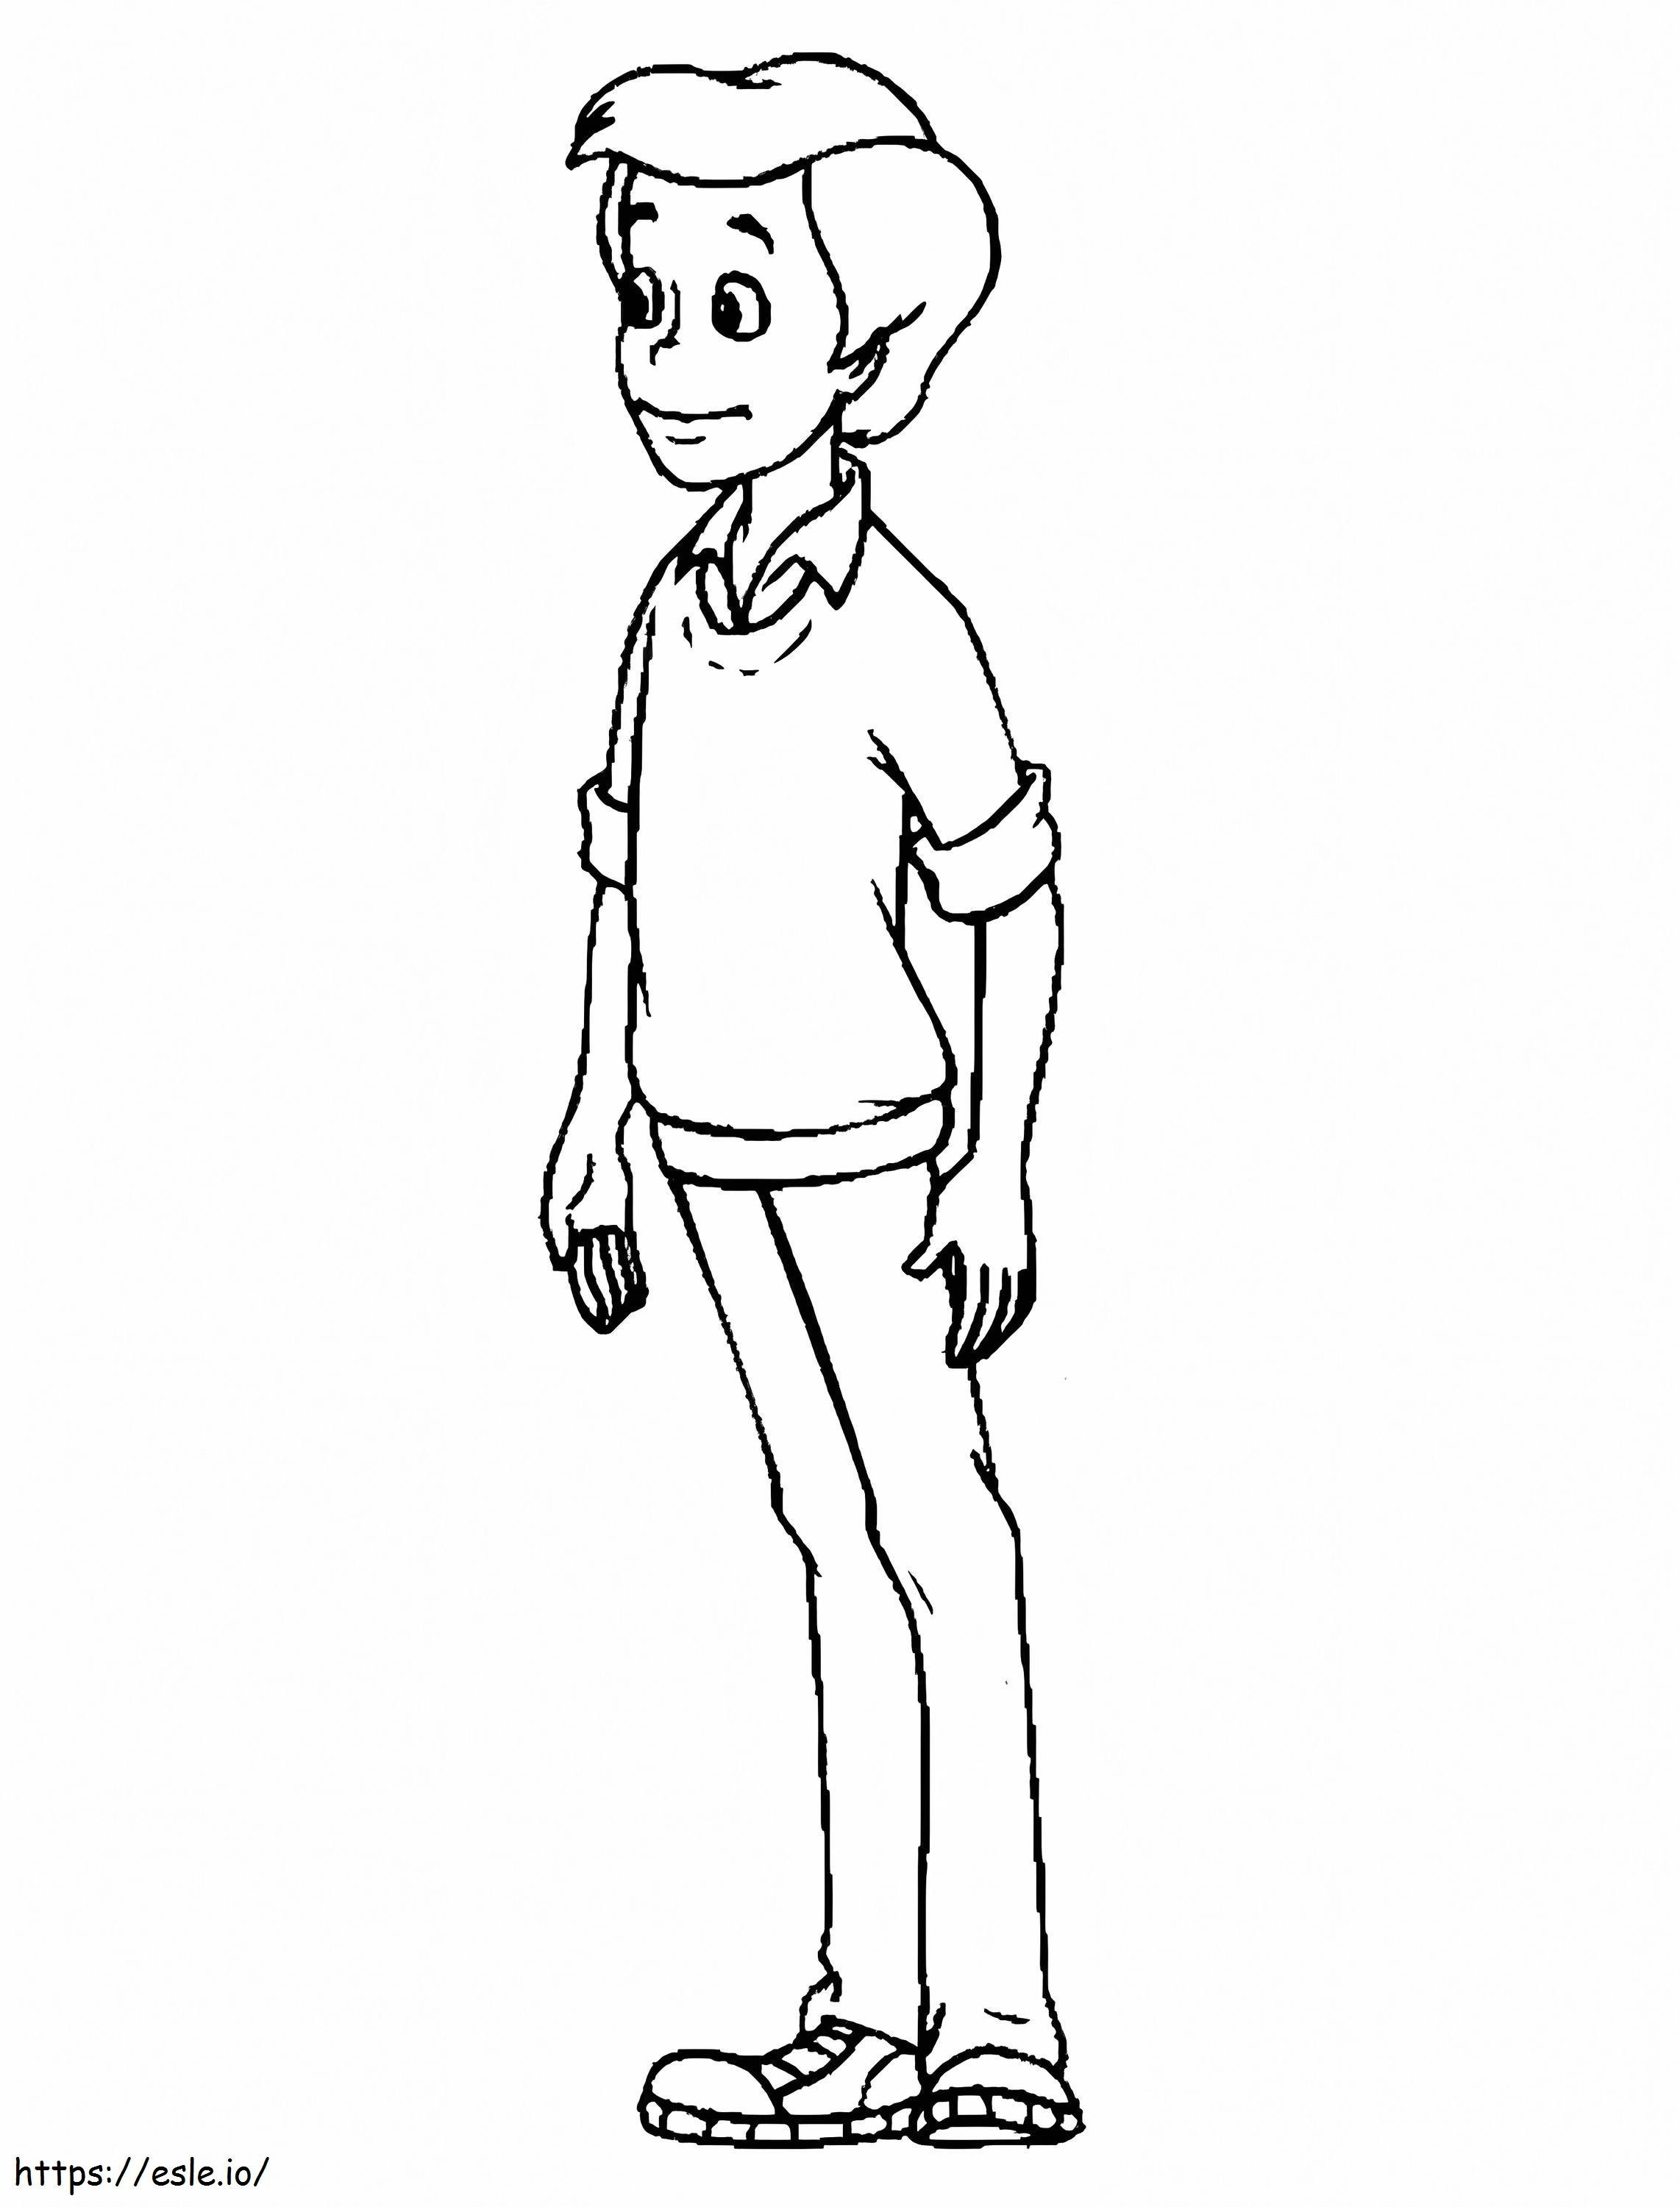 Tommy From Pippi Longstocking coloring page